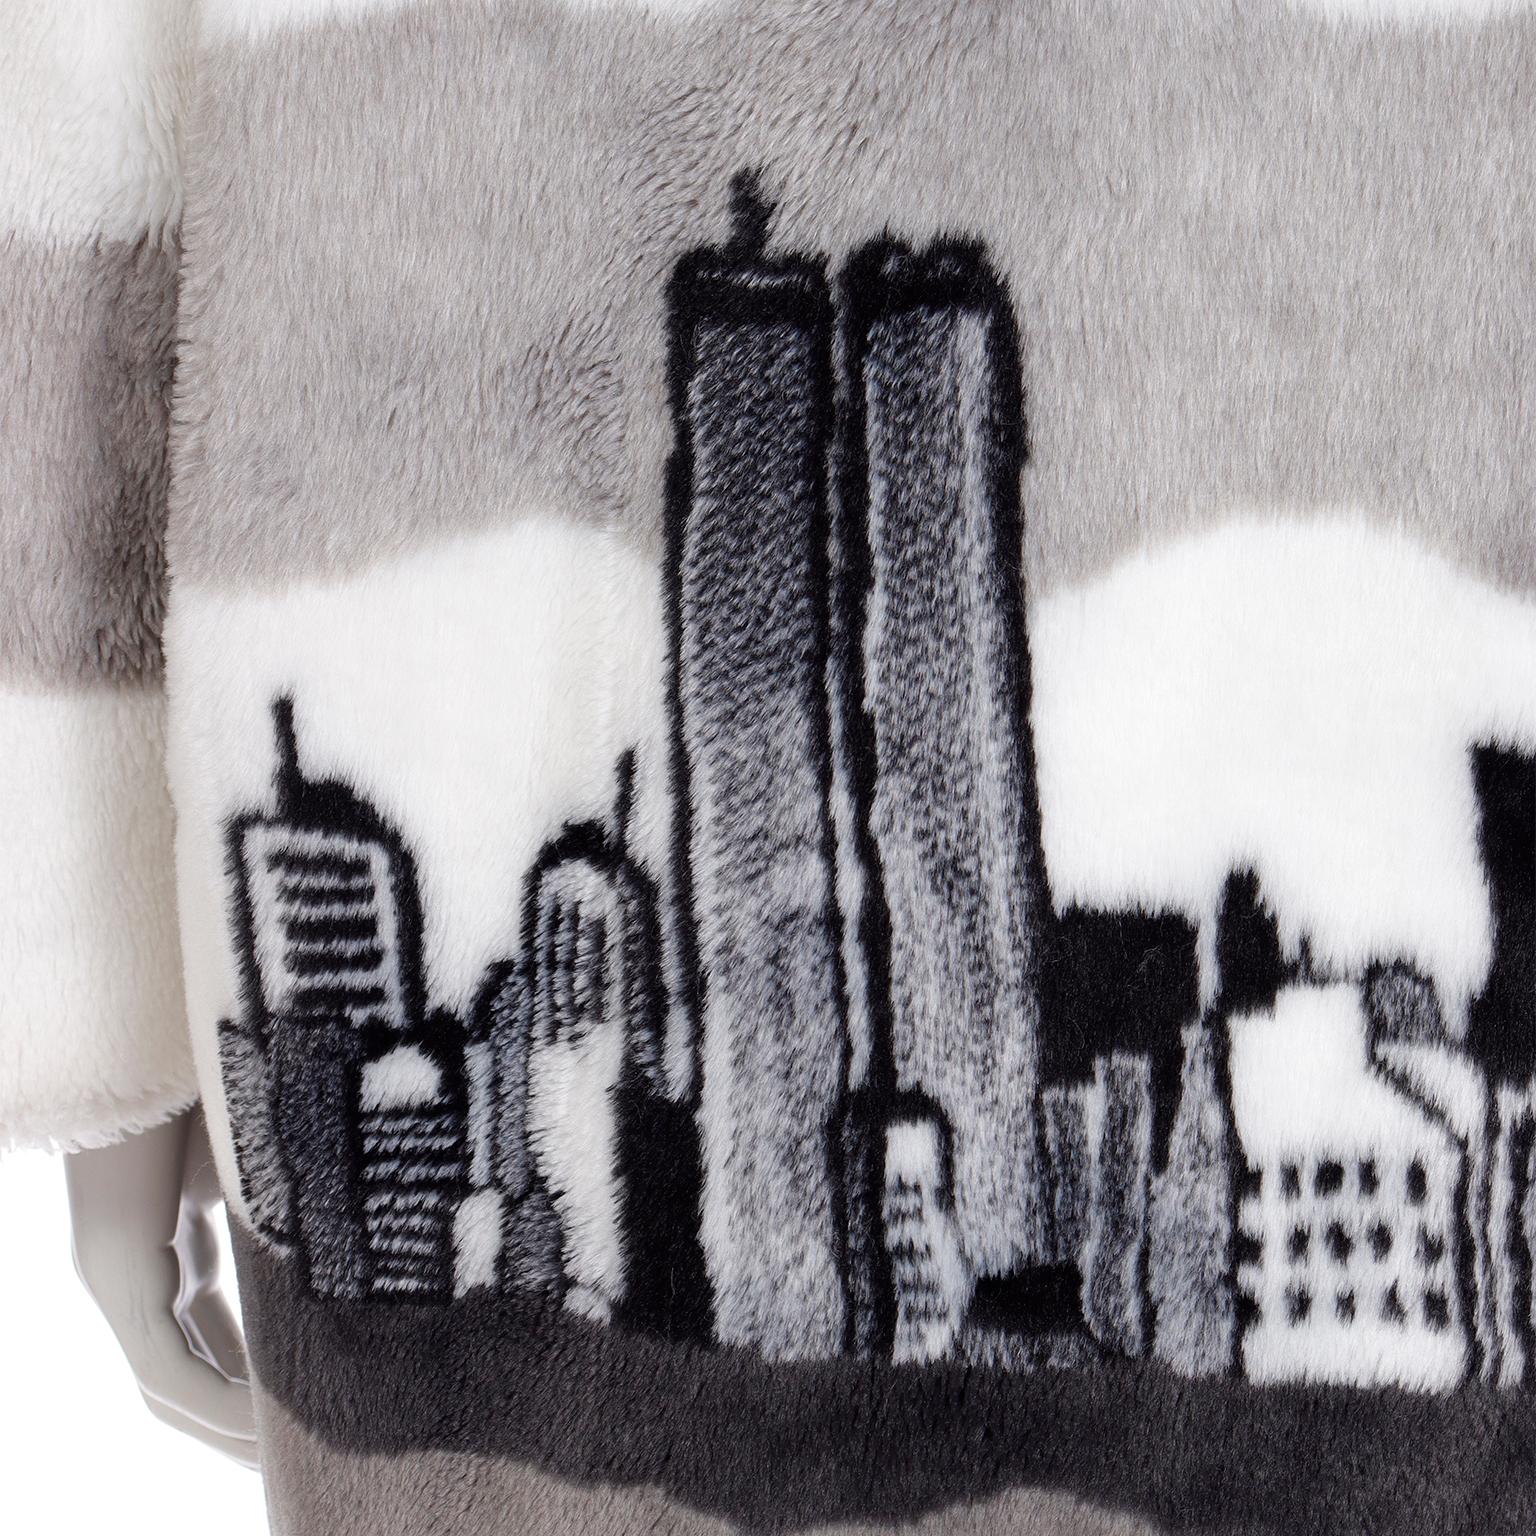 1980s Vintage NYC Skyline Twin Towers White Black & Grey Faux Fur Coat For Sale 3